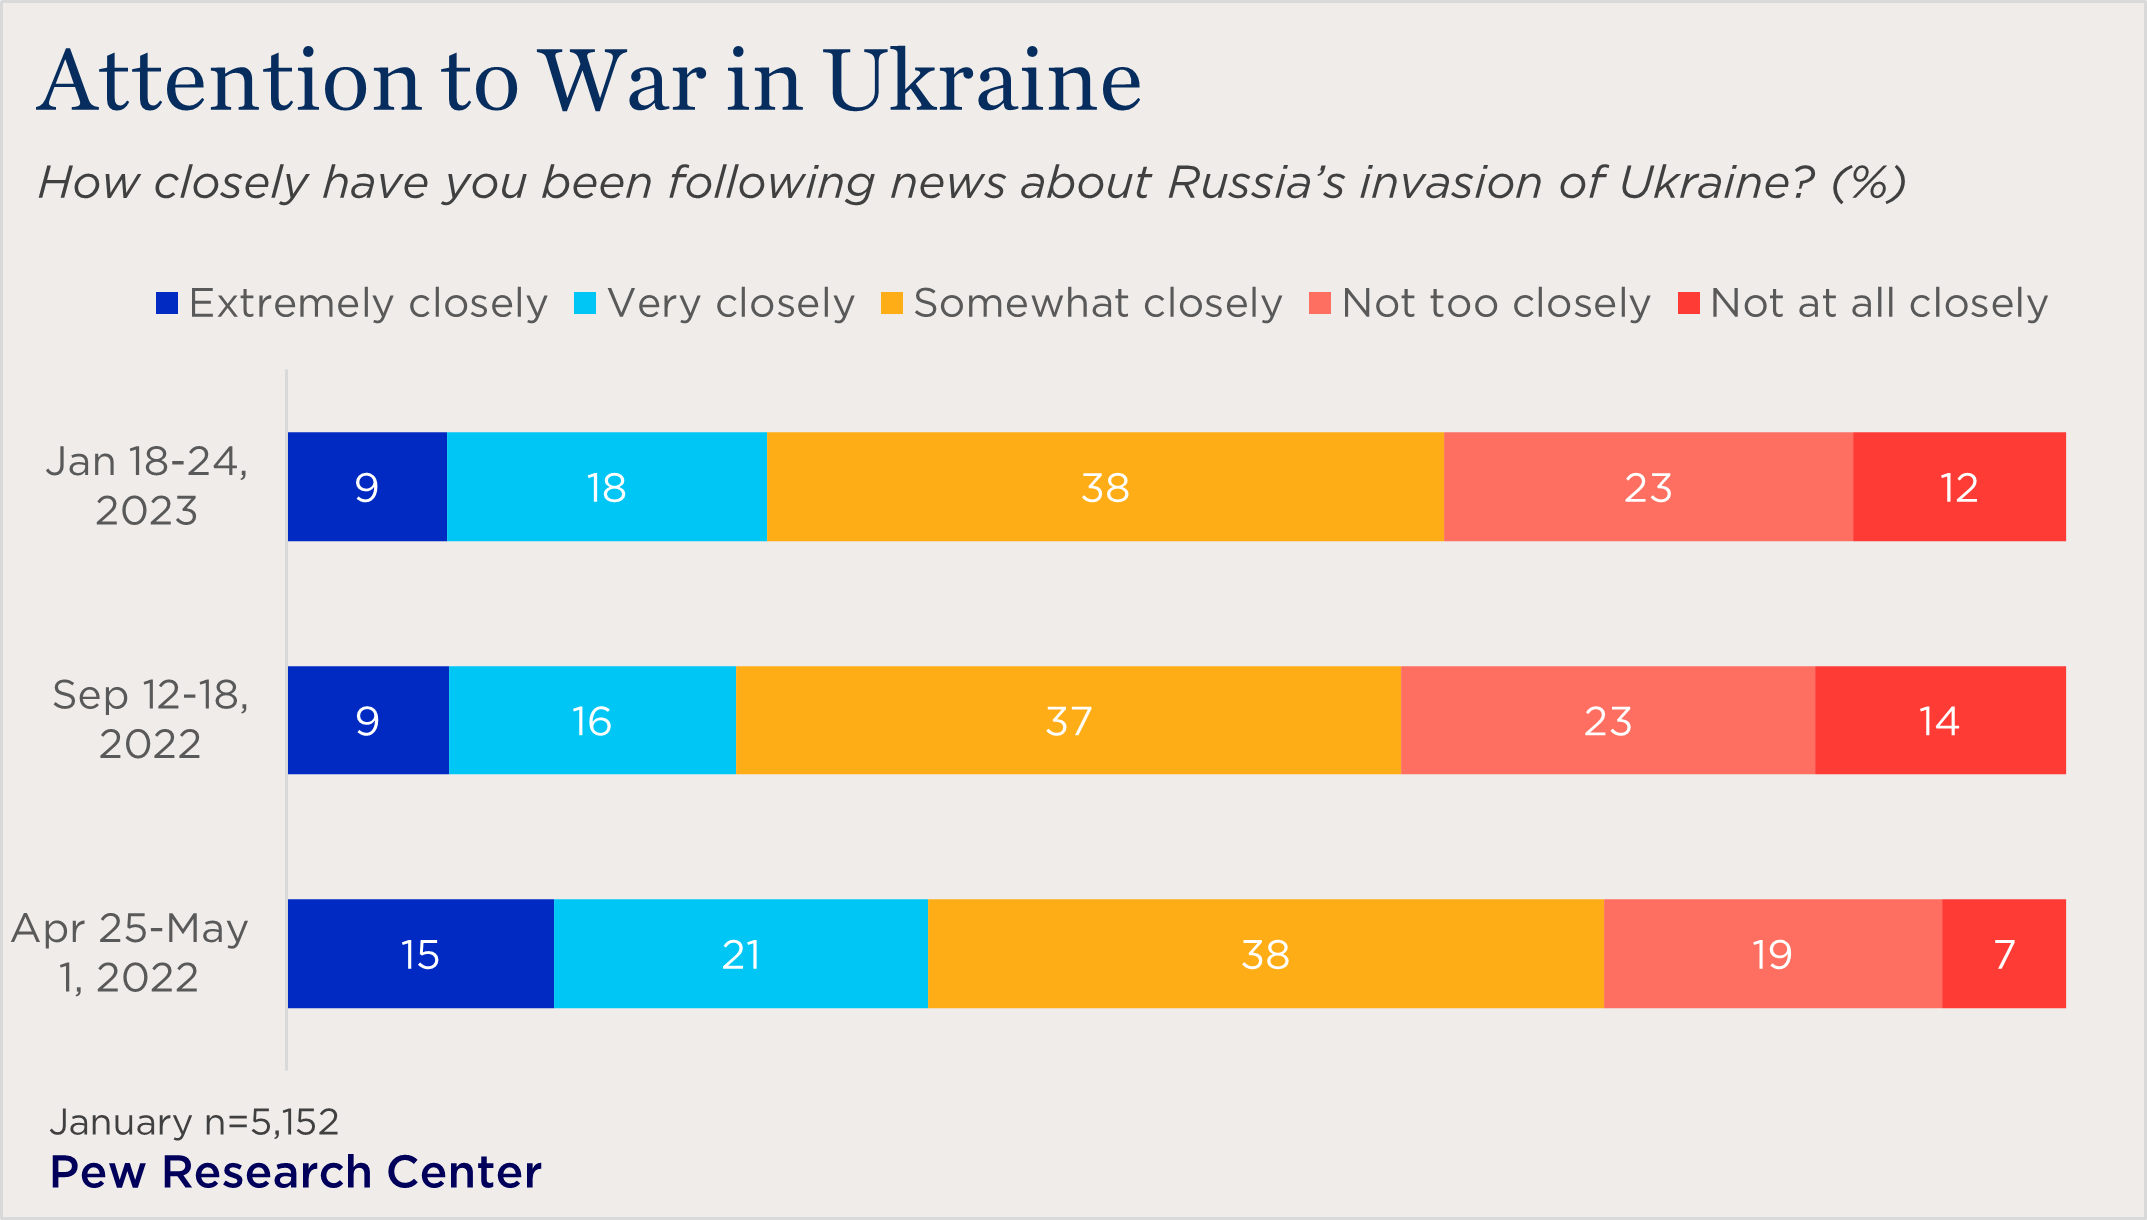 "bar chart showing attention being paid to war in Ukraine"